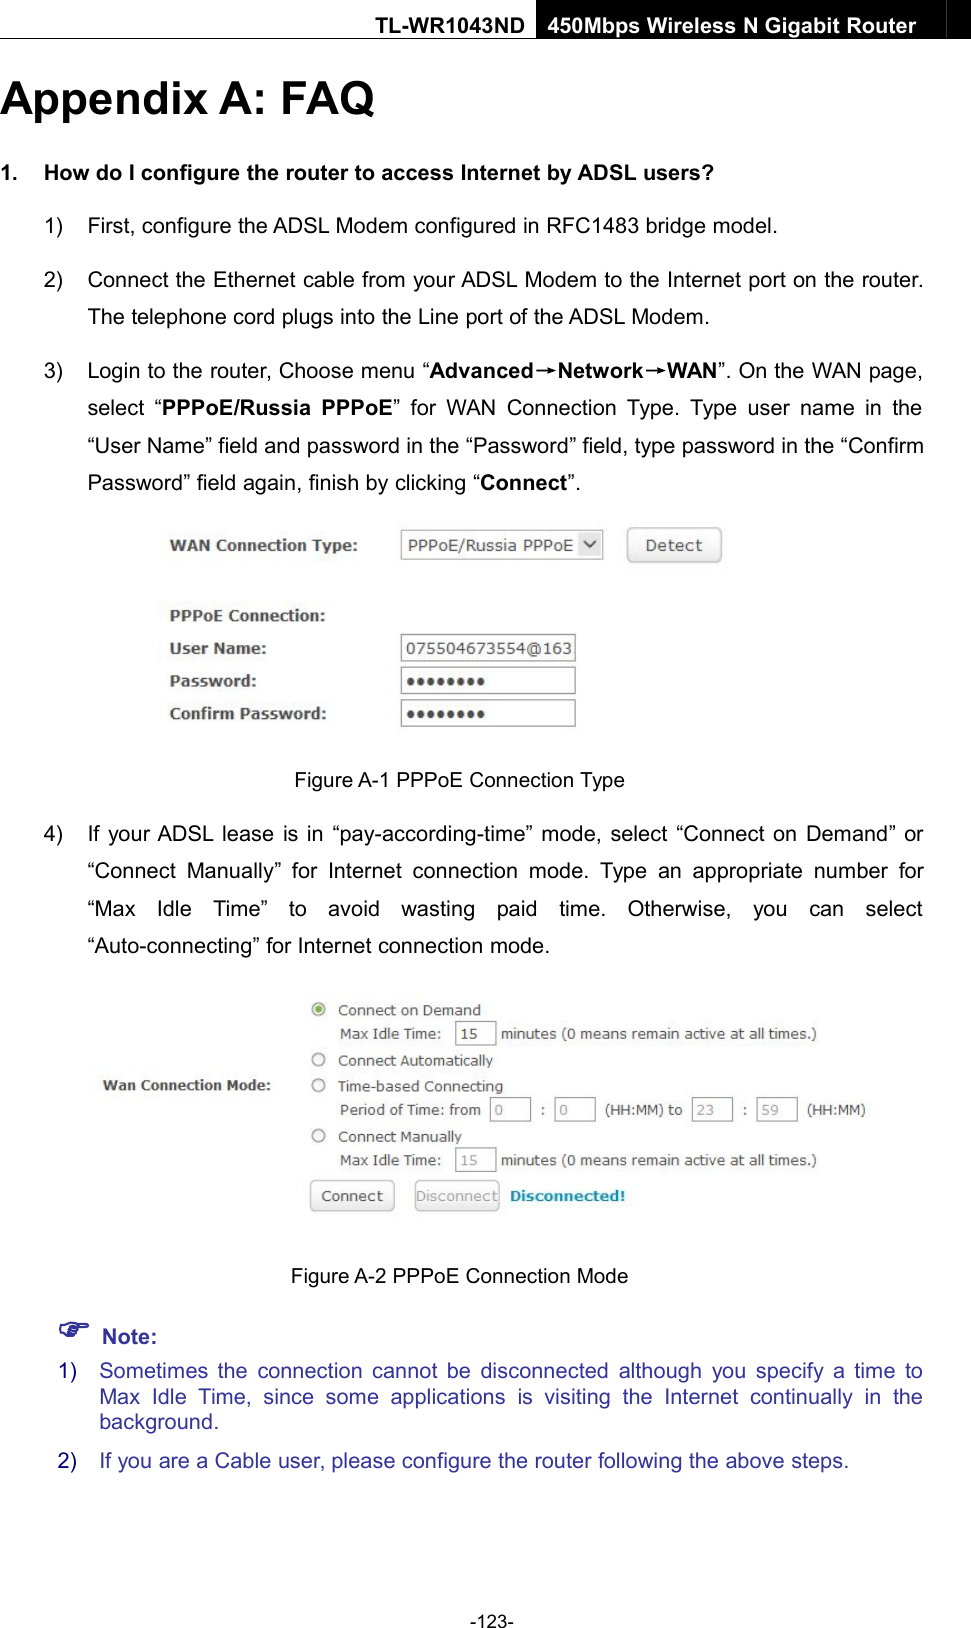 -123-TL-WR1043ND450Mbps Wireless N Gigabit RouterAppendix A: FAQ1. How do I configure the router to access Internet by ADSL users?1) First, configure the ADSL Modem configured in RFC1483 bridge model.2) Connect the Ethernet cable from your ADSL Modem to the Internet port on the router.The telephone cord plugs into the Line port of the ADSL Modem.3) Login to the router, Choose menu “Advanced→Network→WAN”. On the WAN page,select “PPPoE/Russia PPPoE” for WAN Connection Type. Type user name in the“User Name” field and password in the “Password” field, type password in the “ConfirmPassword” field again, finish by clicking “Connect”.Figure A-1 PPPoE Connection Type4) If your ADSL lease is in “pay-according-time” mode, select “Connect on Demand” or“Connect Manually” for Internet connection mode. Type an appropriate number for“Max Idle Time” to avoid wasting paid time. Otherwise, you can select“Auto-connecting” for Internet connection mode.Figure A-2 PPPoE Connection ModeNote:1) Sometimes the connection cannot be disconnected although you specify a time toMax Idle Time, since some applications is visiting the Internet continually in thebackground.2) If you are a Cable user, please configure the router following the above steps.